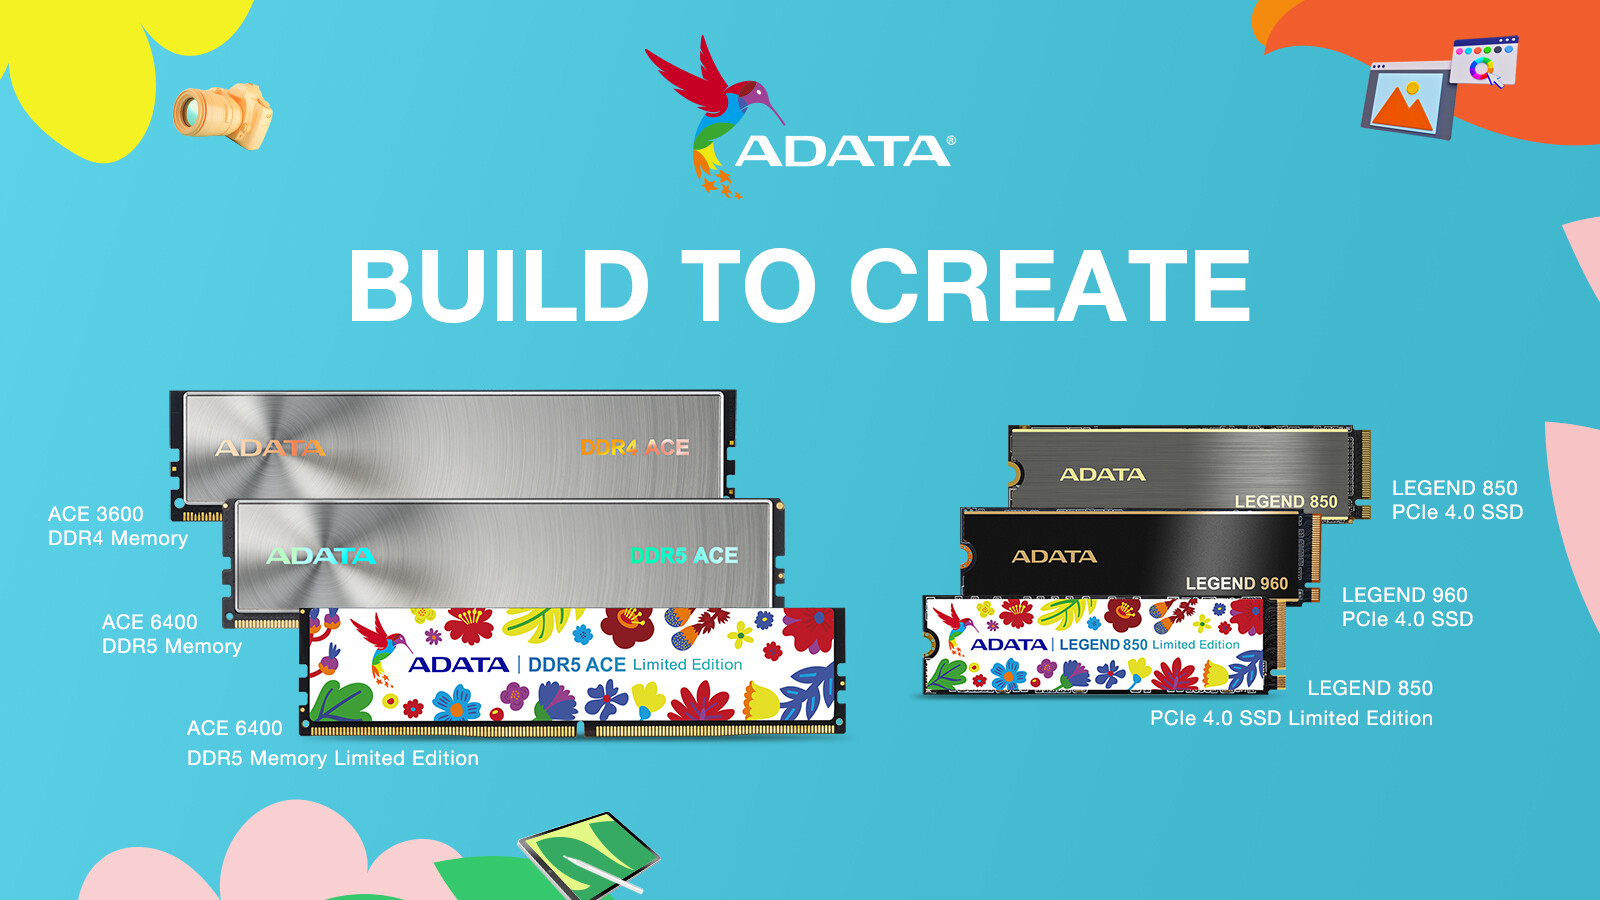 ADATA unveils its new products in the MERAVERSE